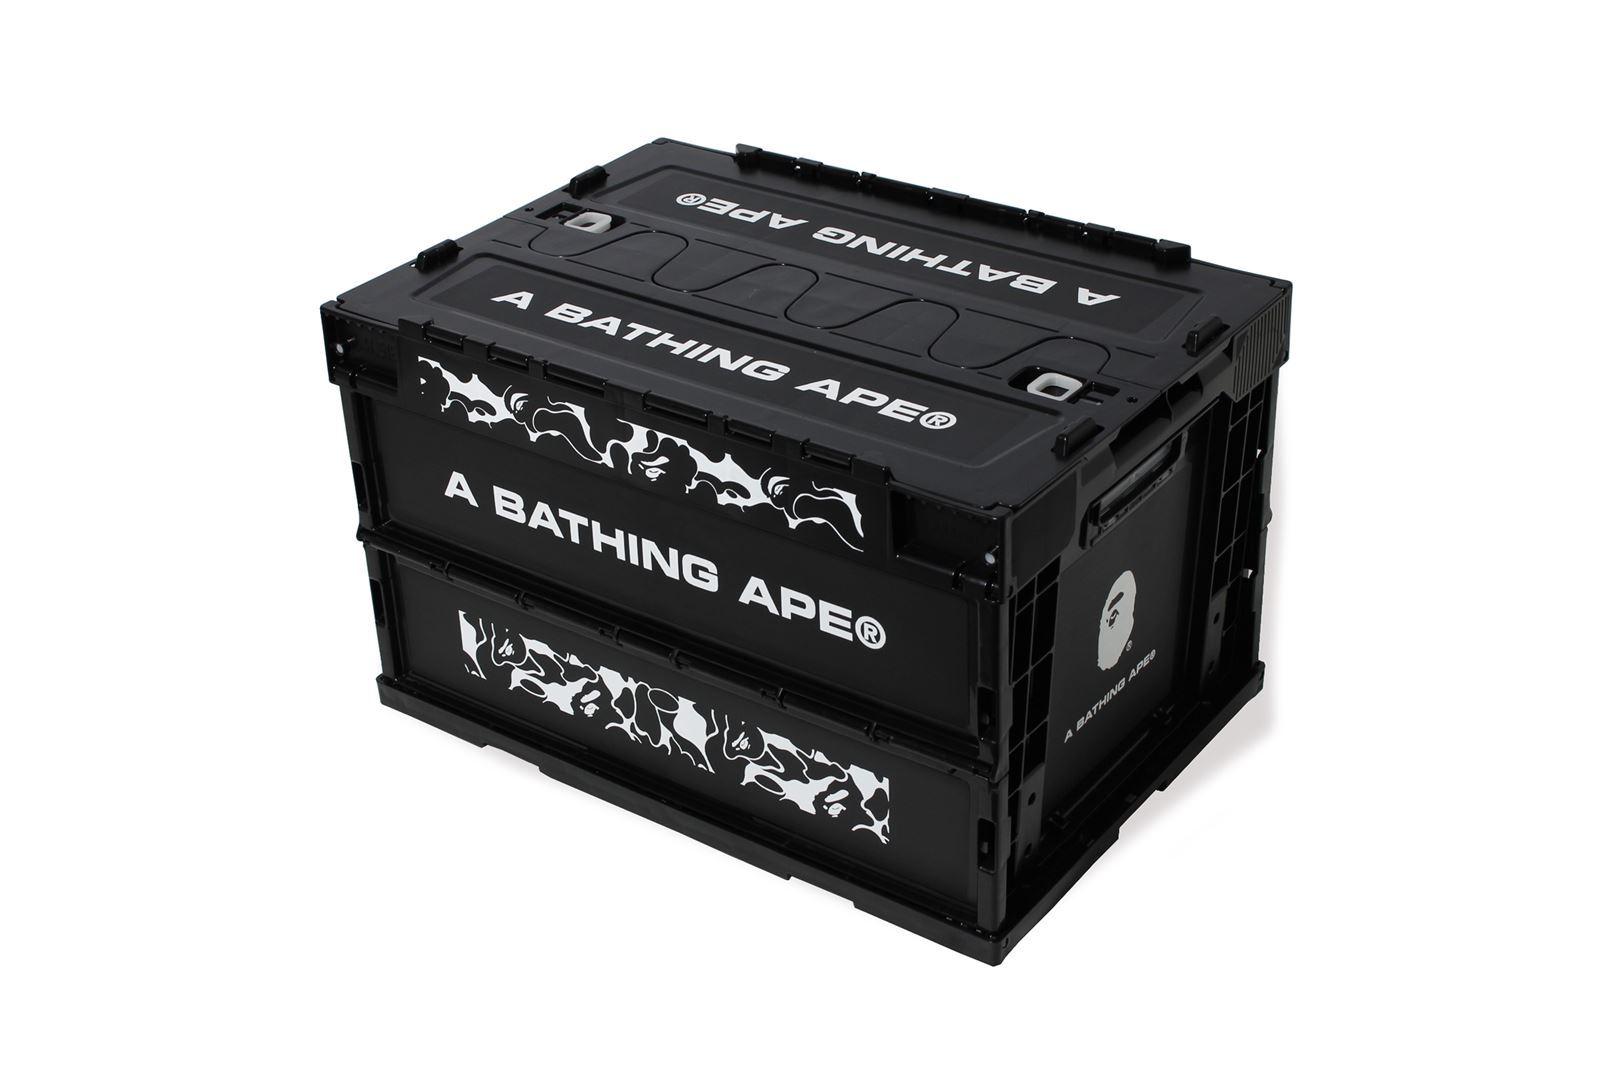 A BATHING APE® CONTAINER_a0174495_11363889.jpg